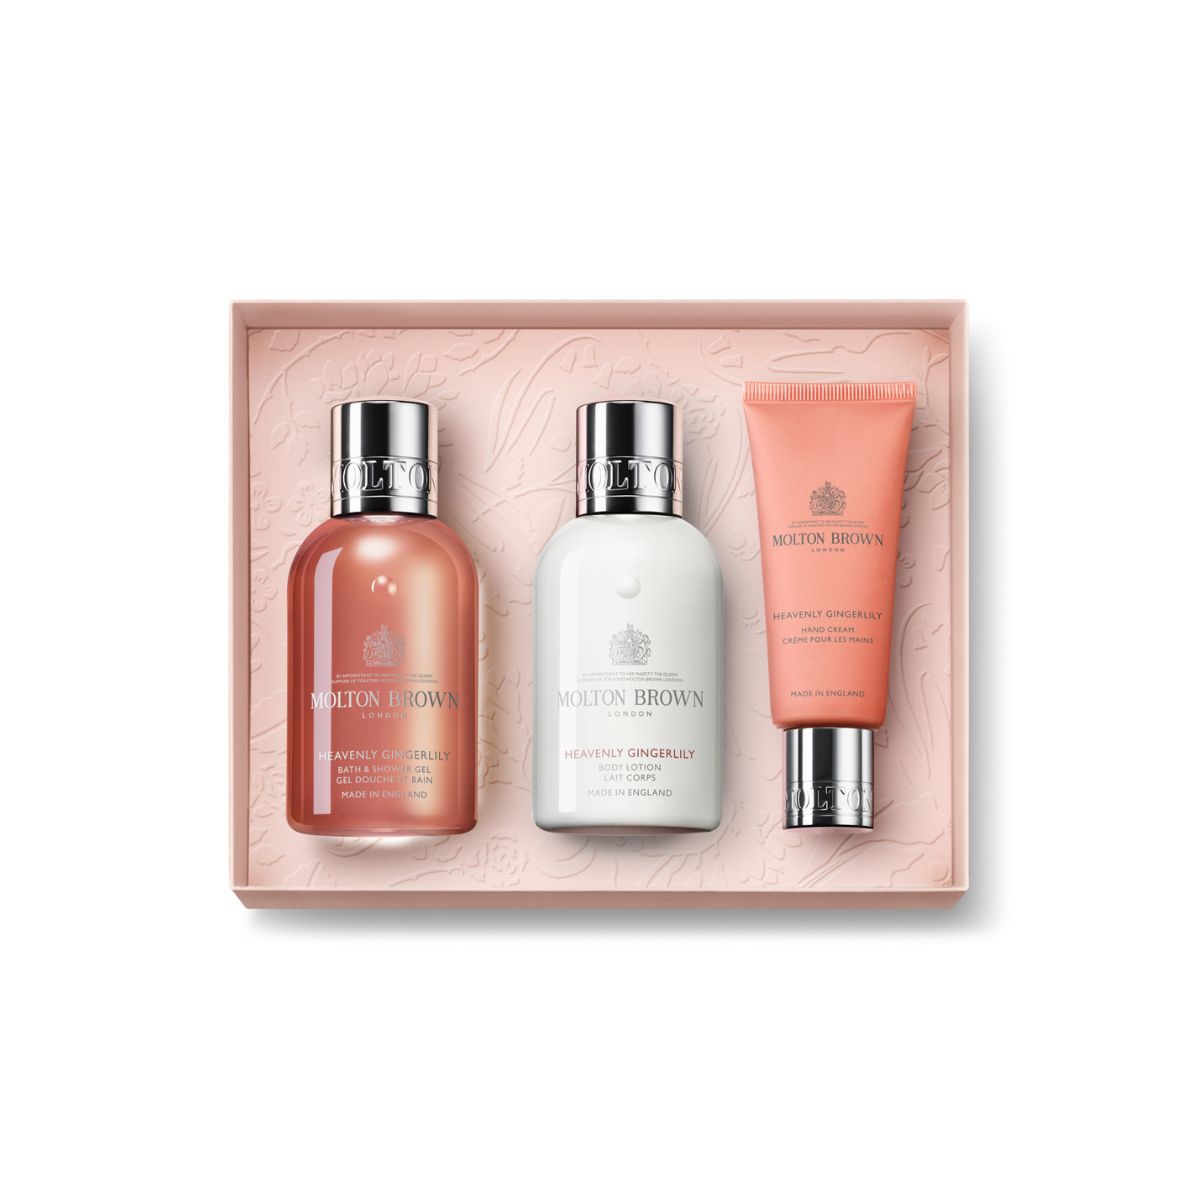 Molton Brown Heavenly Gingerlily Travel Body & Hand Gift Set